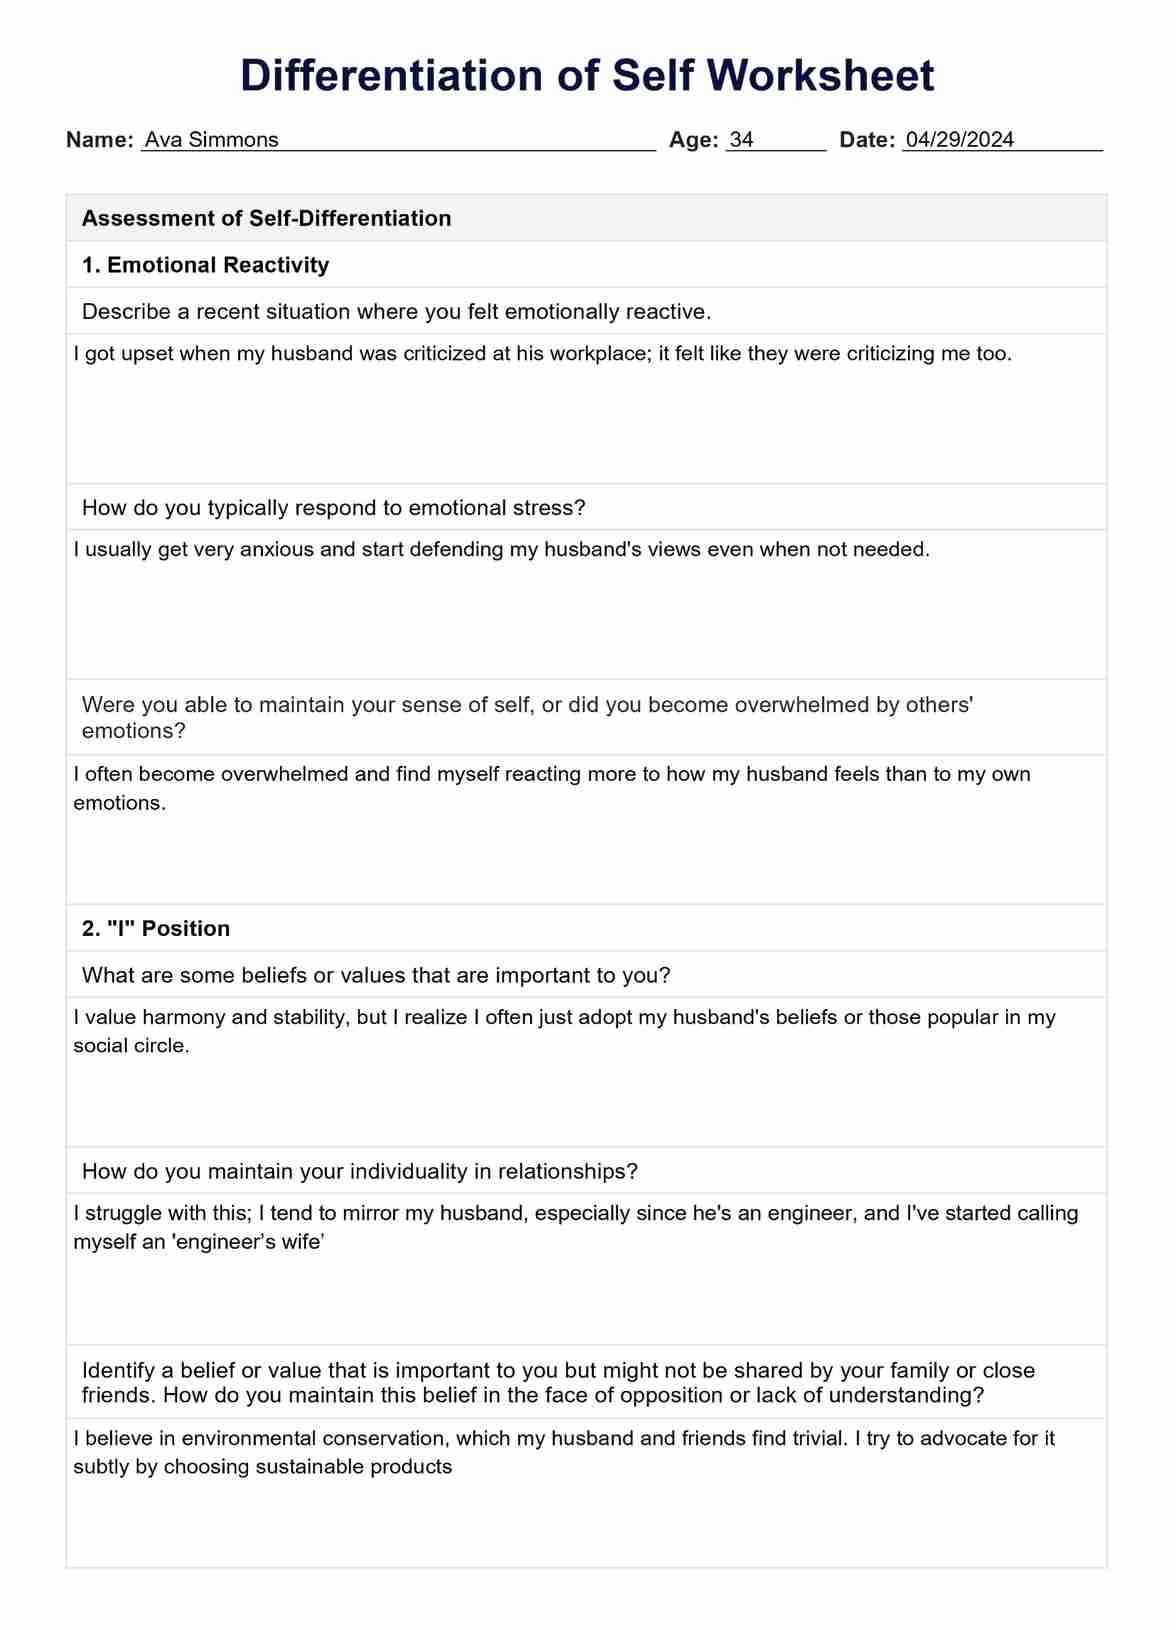 Differentiation of Self Worksheet PDF Example